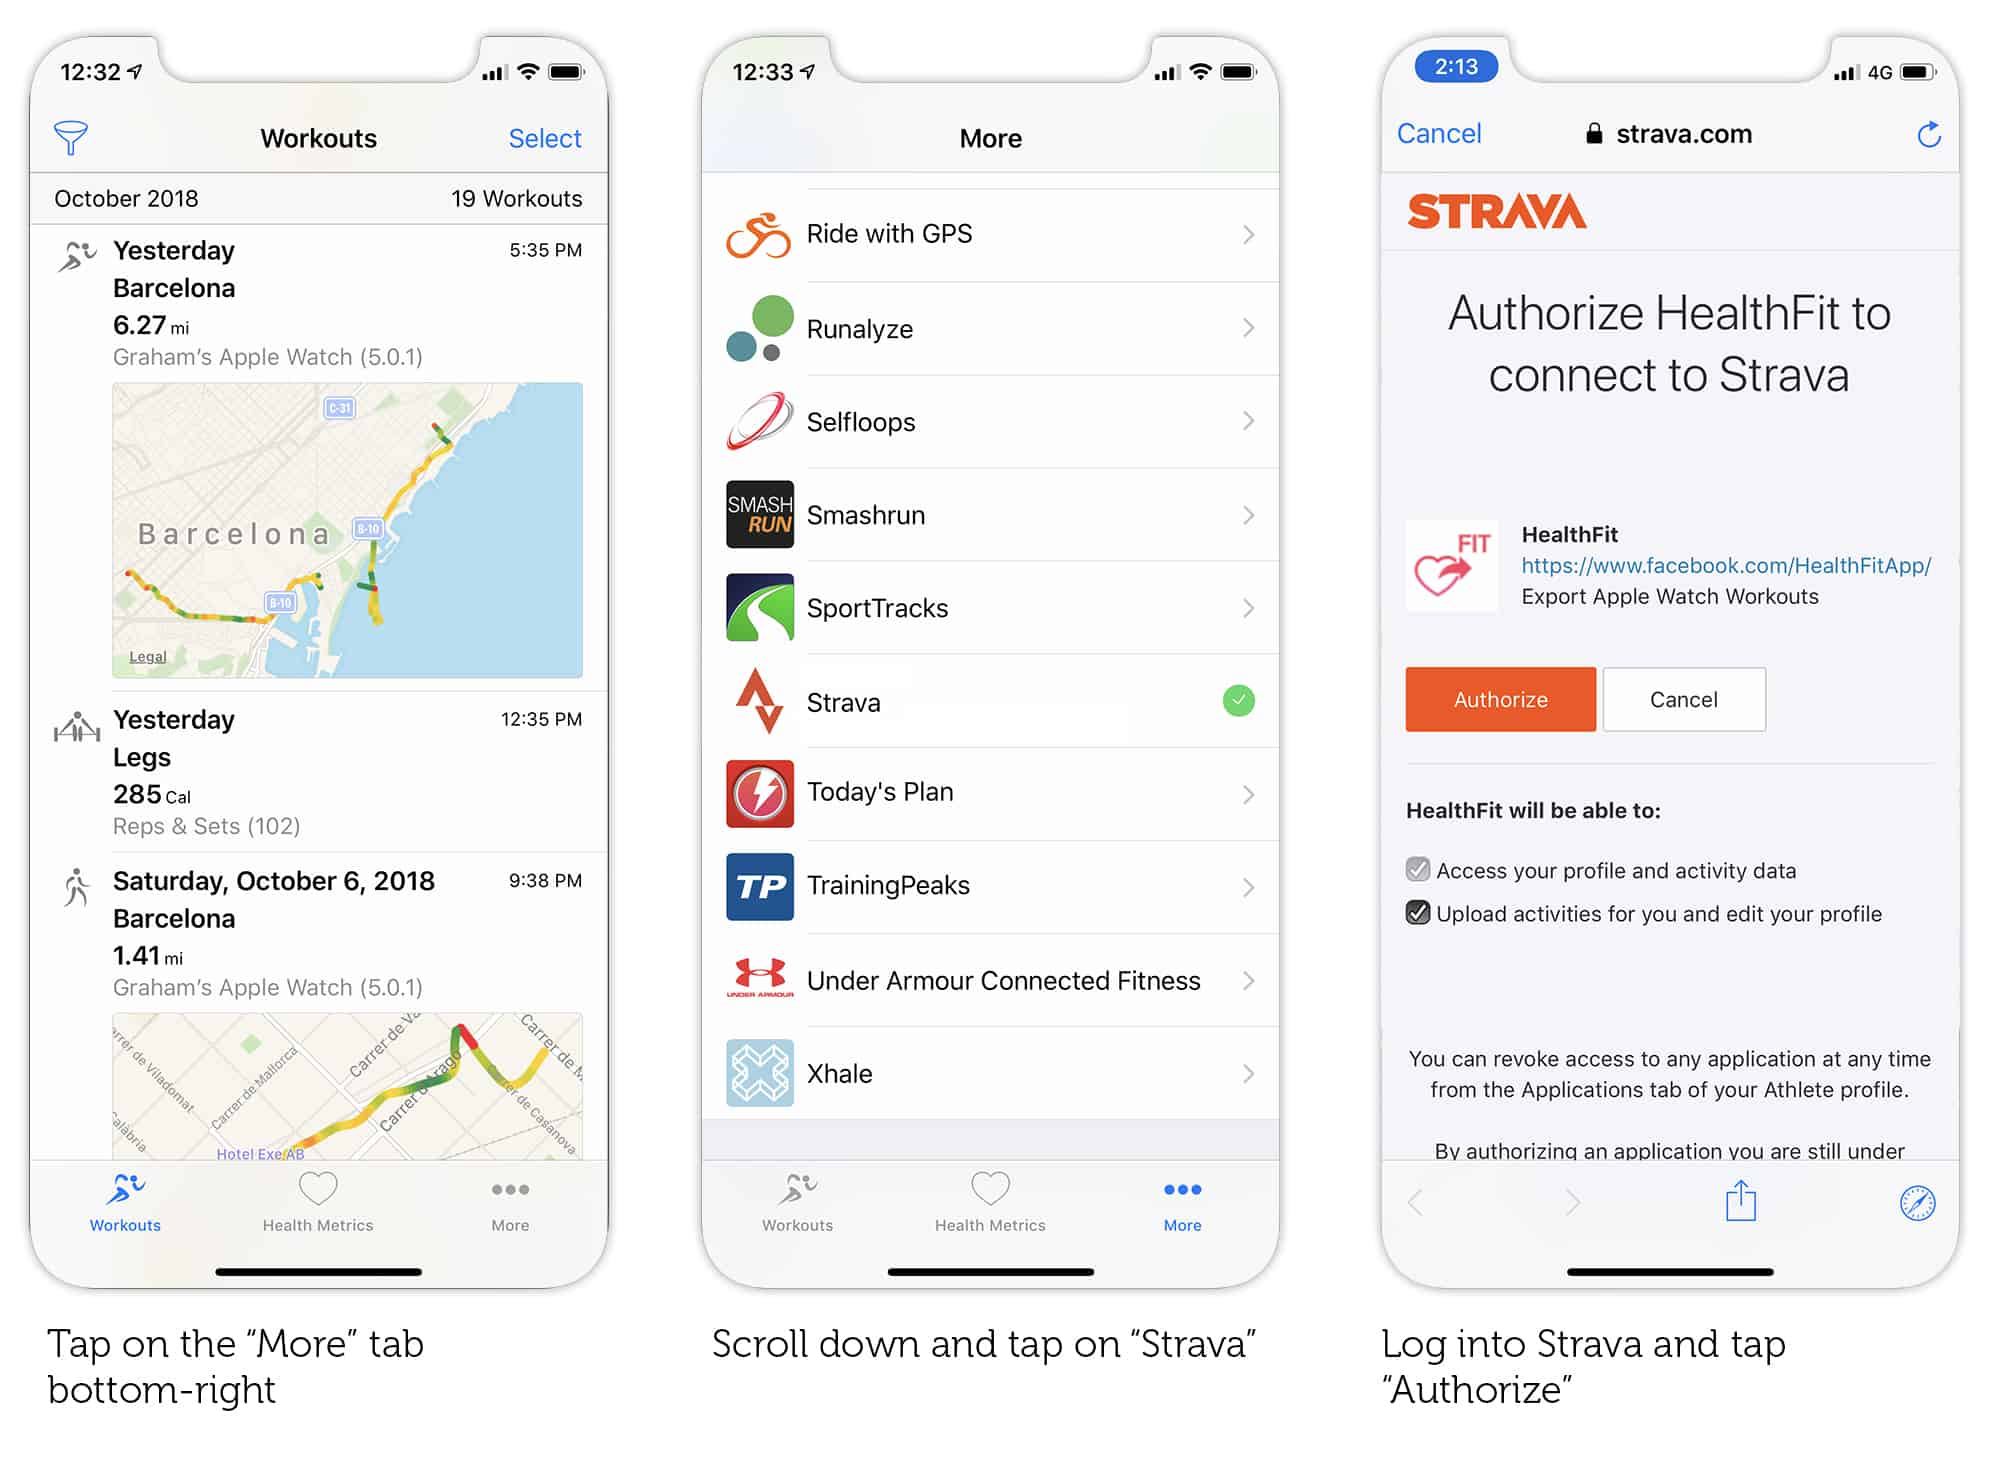 Connecting HealthFit with Strava is easy too